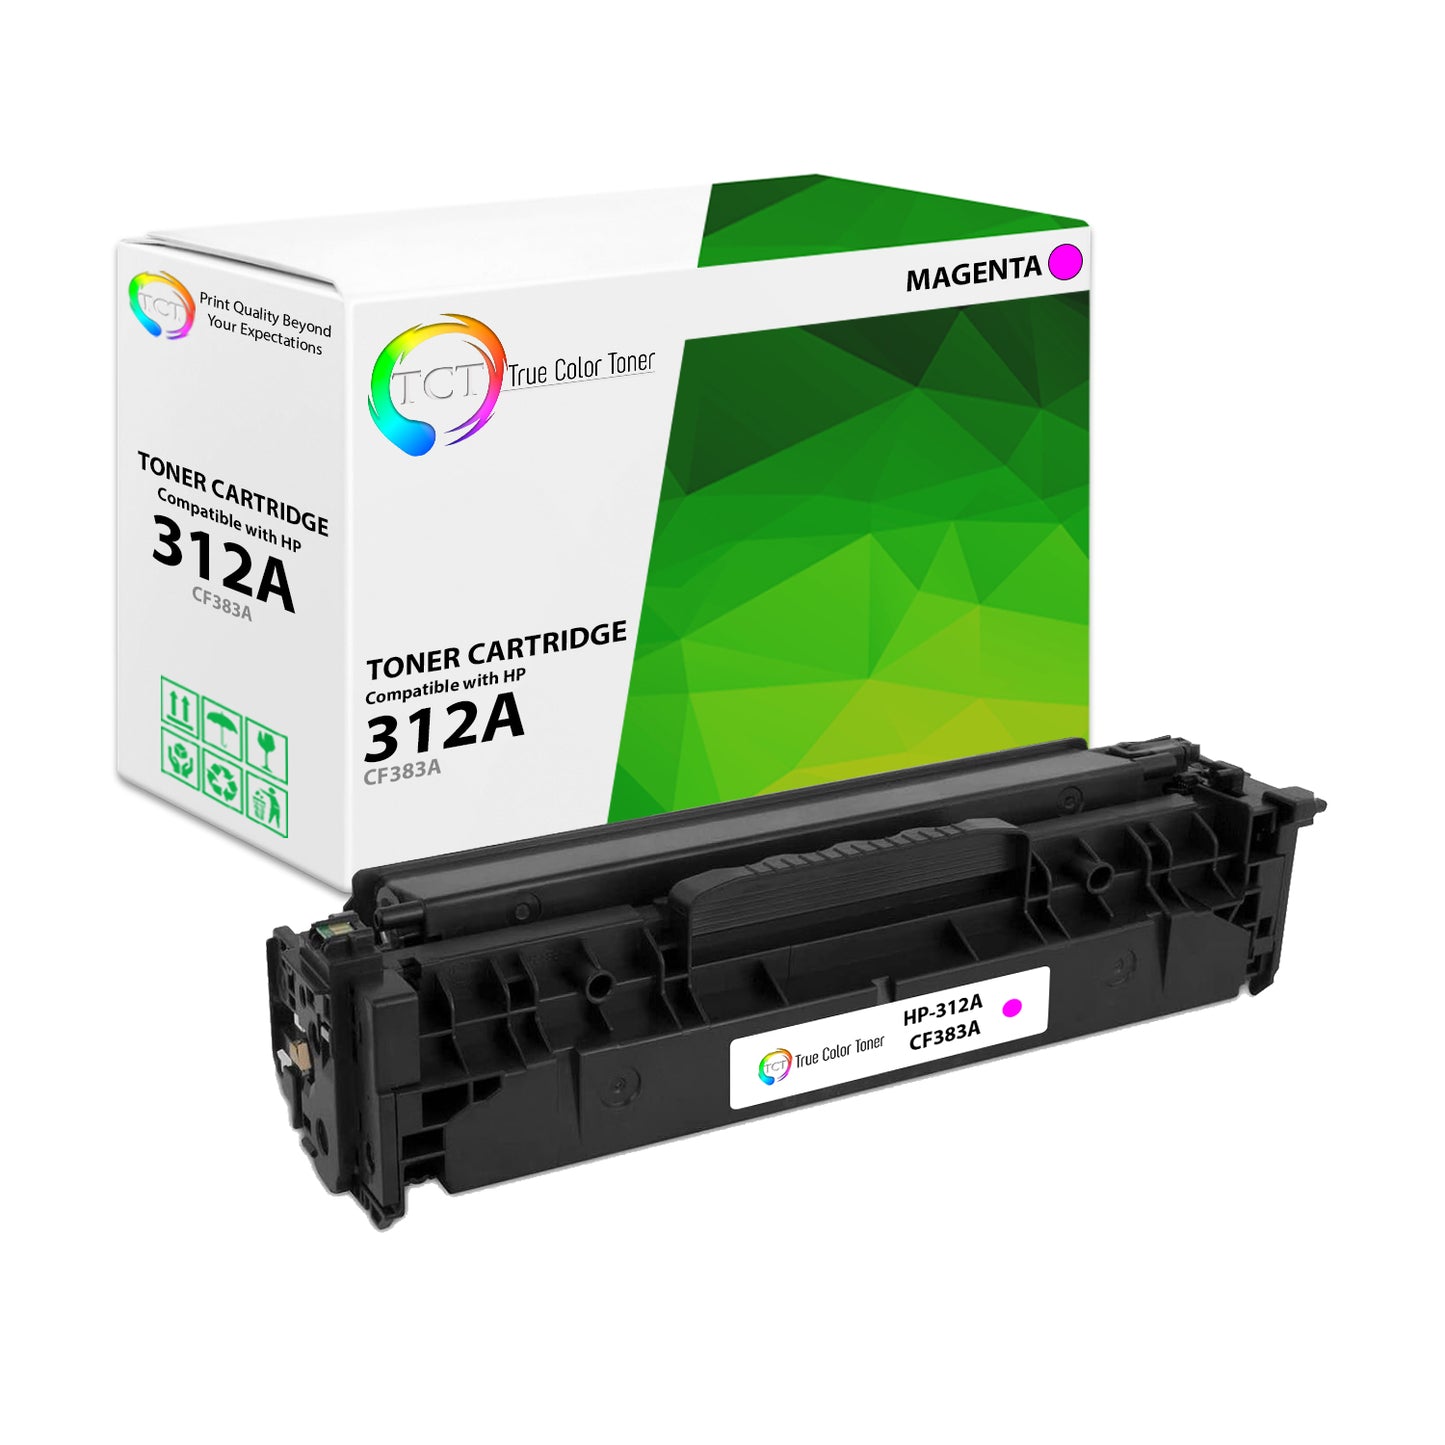 TCT Compatible Toner Cartridge Replacement for the HP 312A Series - 1 Pack Magenta